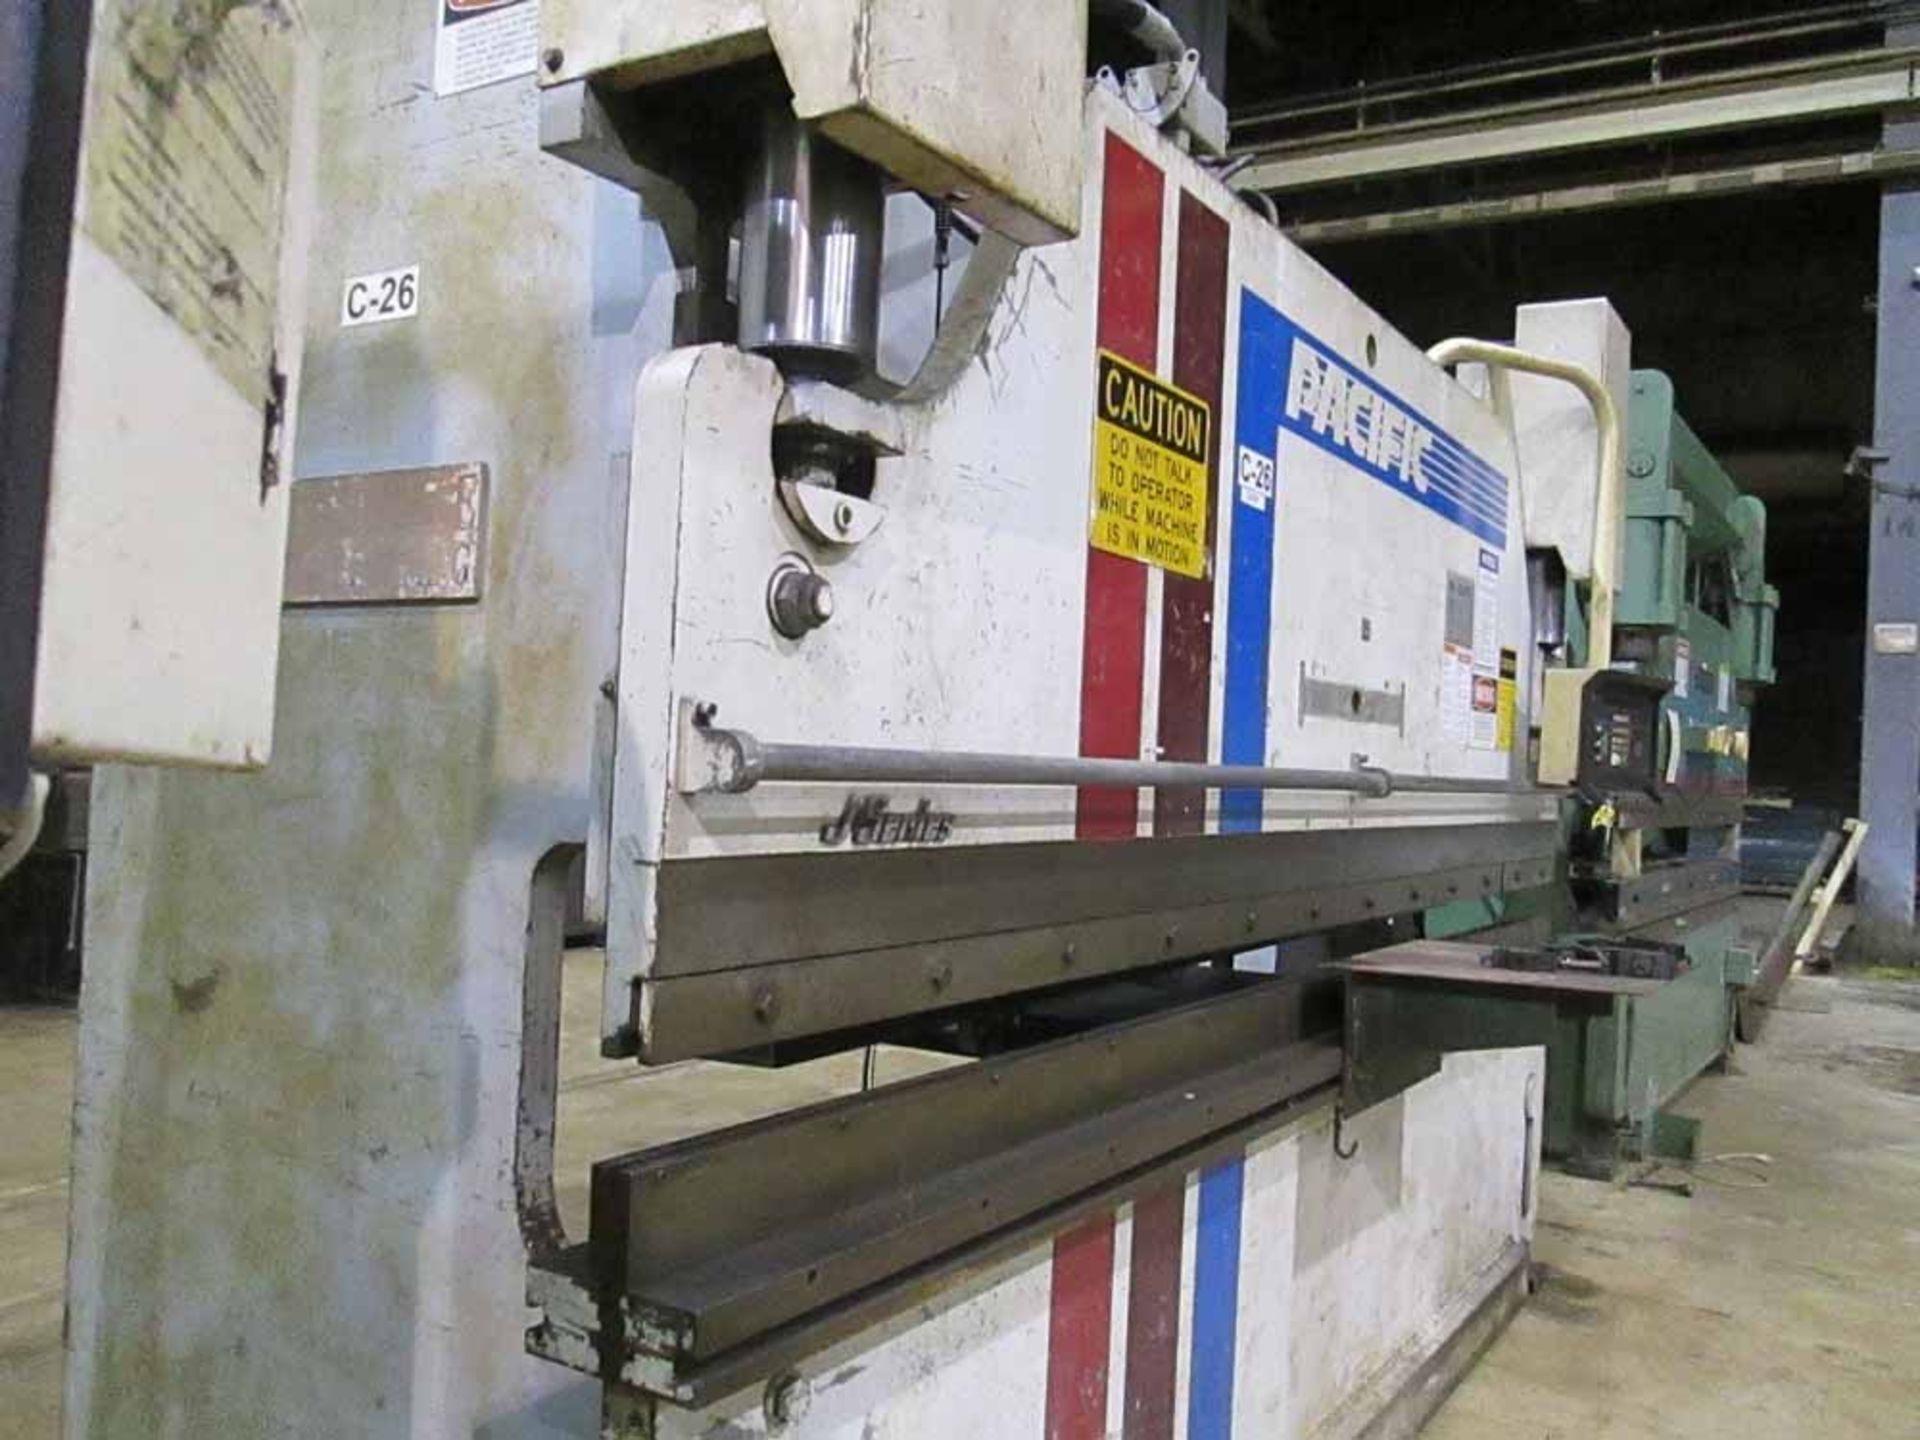 Pacific CNC 2 Axis Hyd. Press Brake, 110-Ton x 12' - Located In Painesville, OH - 6426 - Image 3 of 12